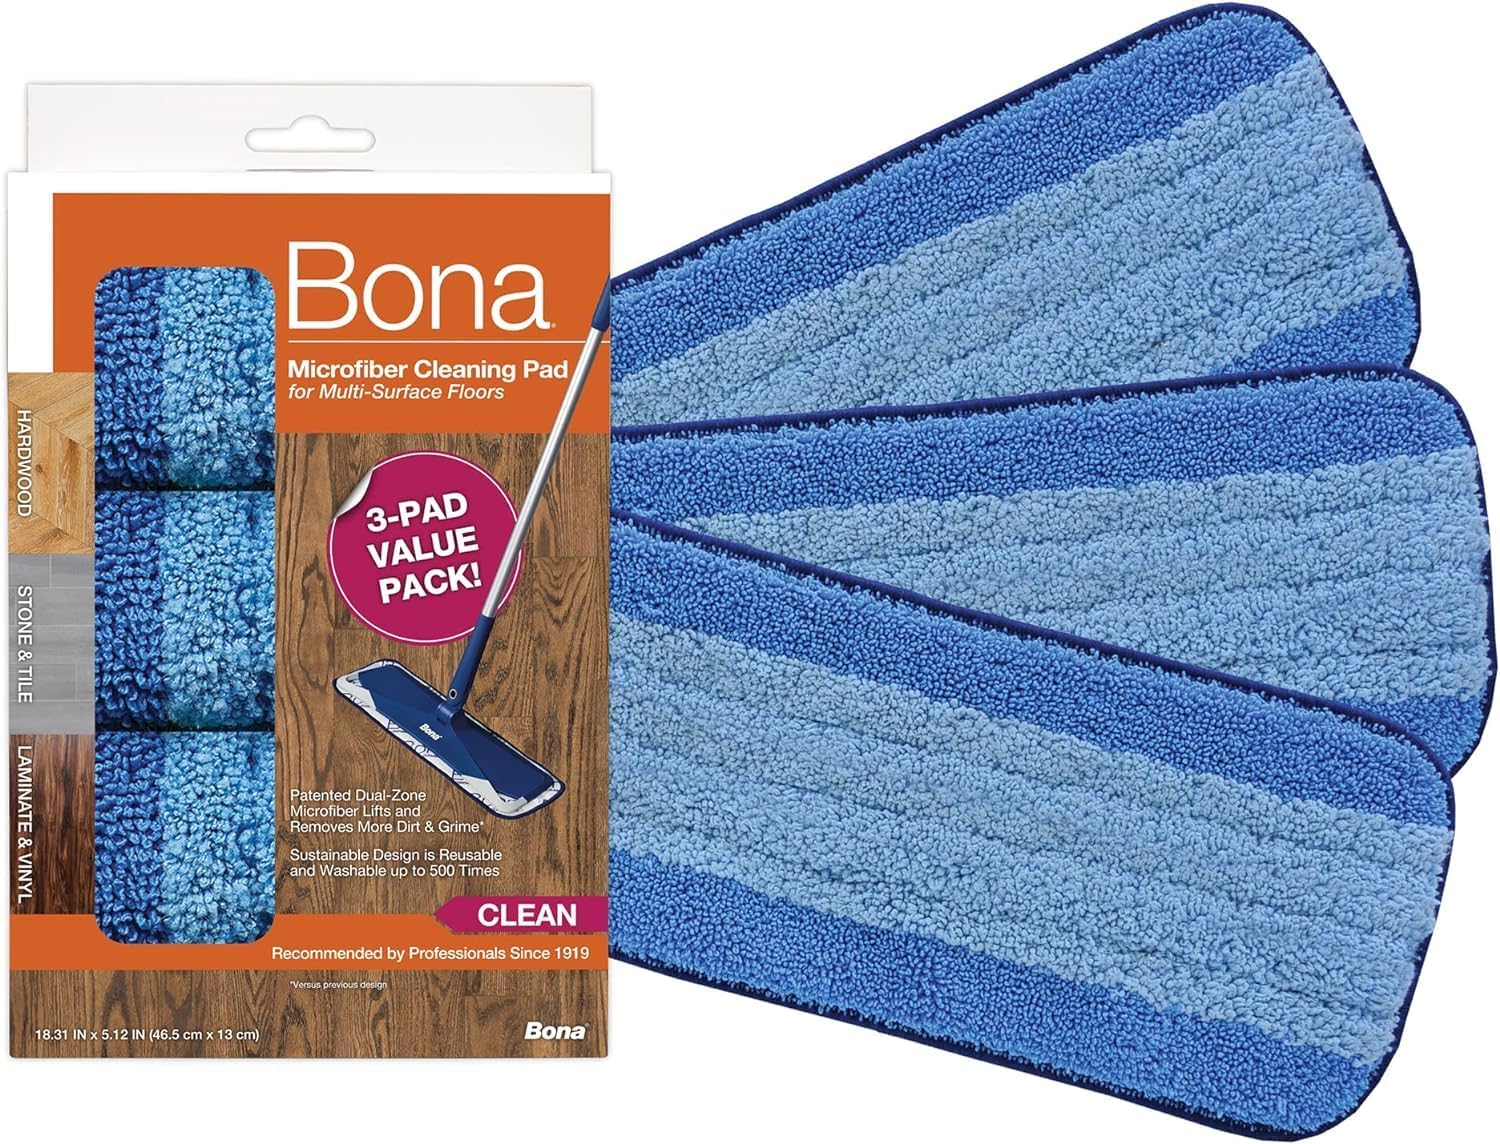 Bona Mop Microfiber Cleaning Pad for Hardwood & Hard Surface Floors - Value 3-Pack - For Use With Bona Mops - Dual Zone Cleaning